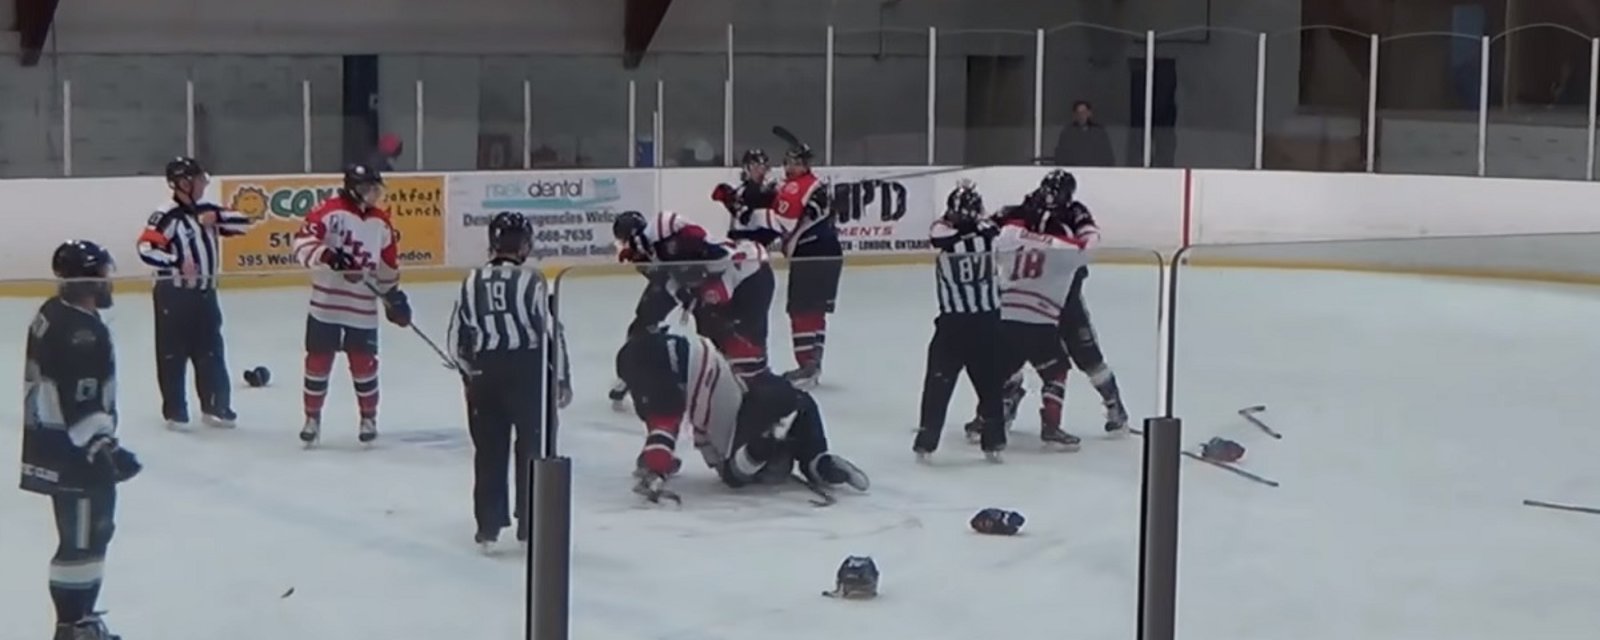 Goalie gets hit, players brawl and then the referee and coaches throw punches!